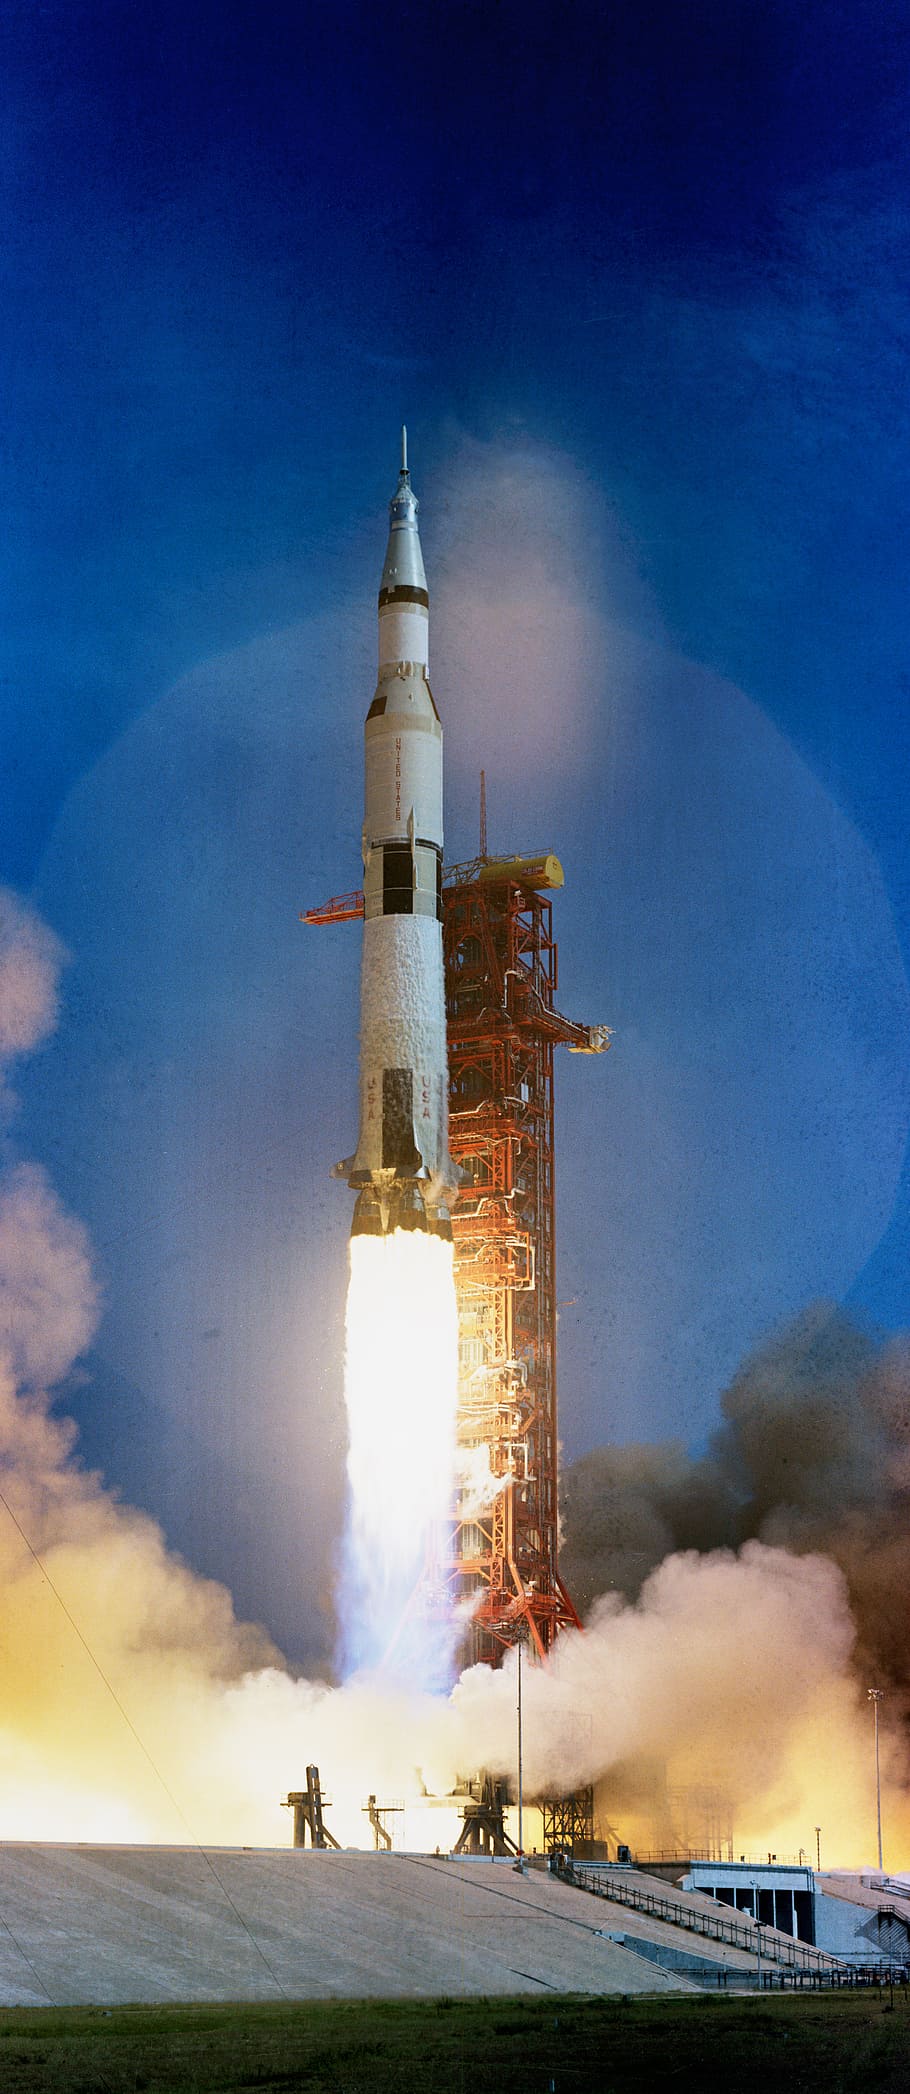 Apollo 11, space, shuttle, lunch, building exterior, architecture, built structure, tower, sky, smoke - physical structure